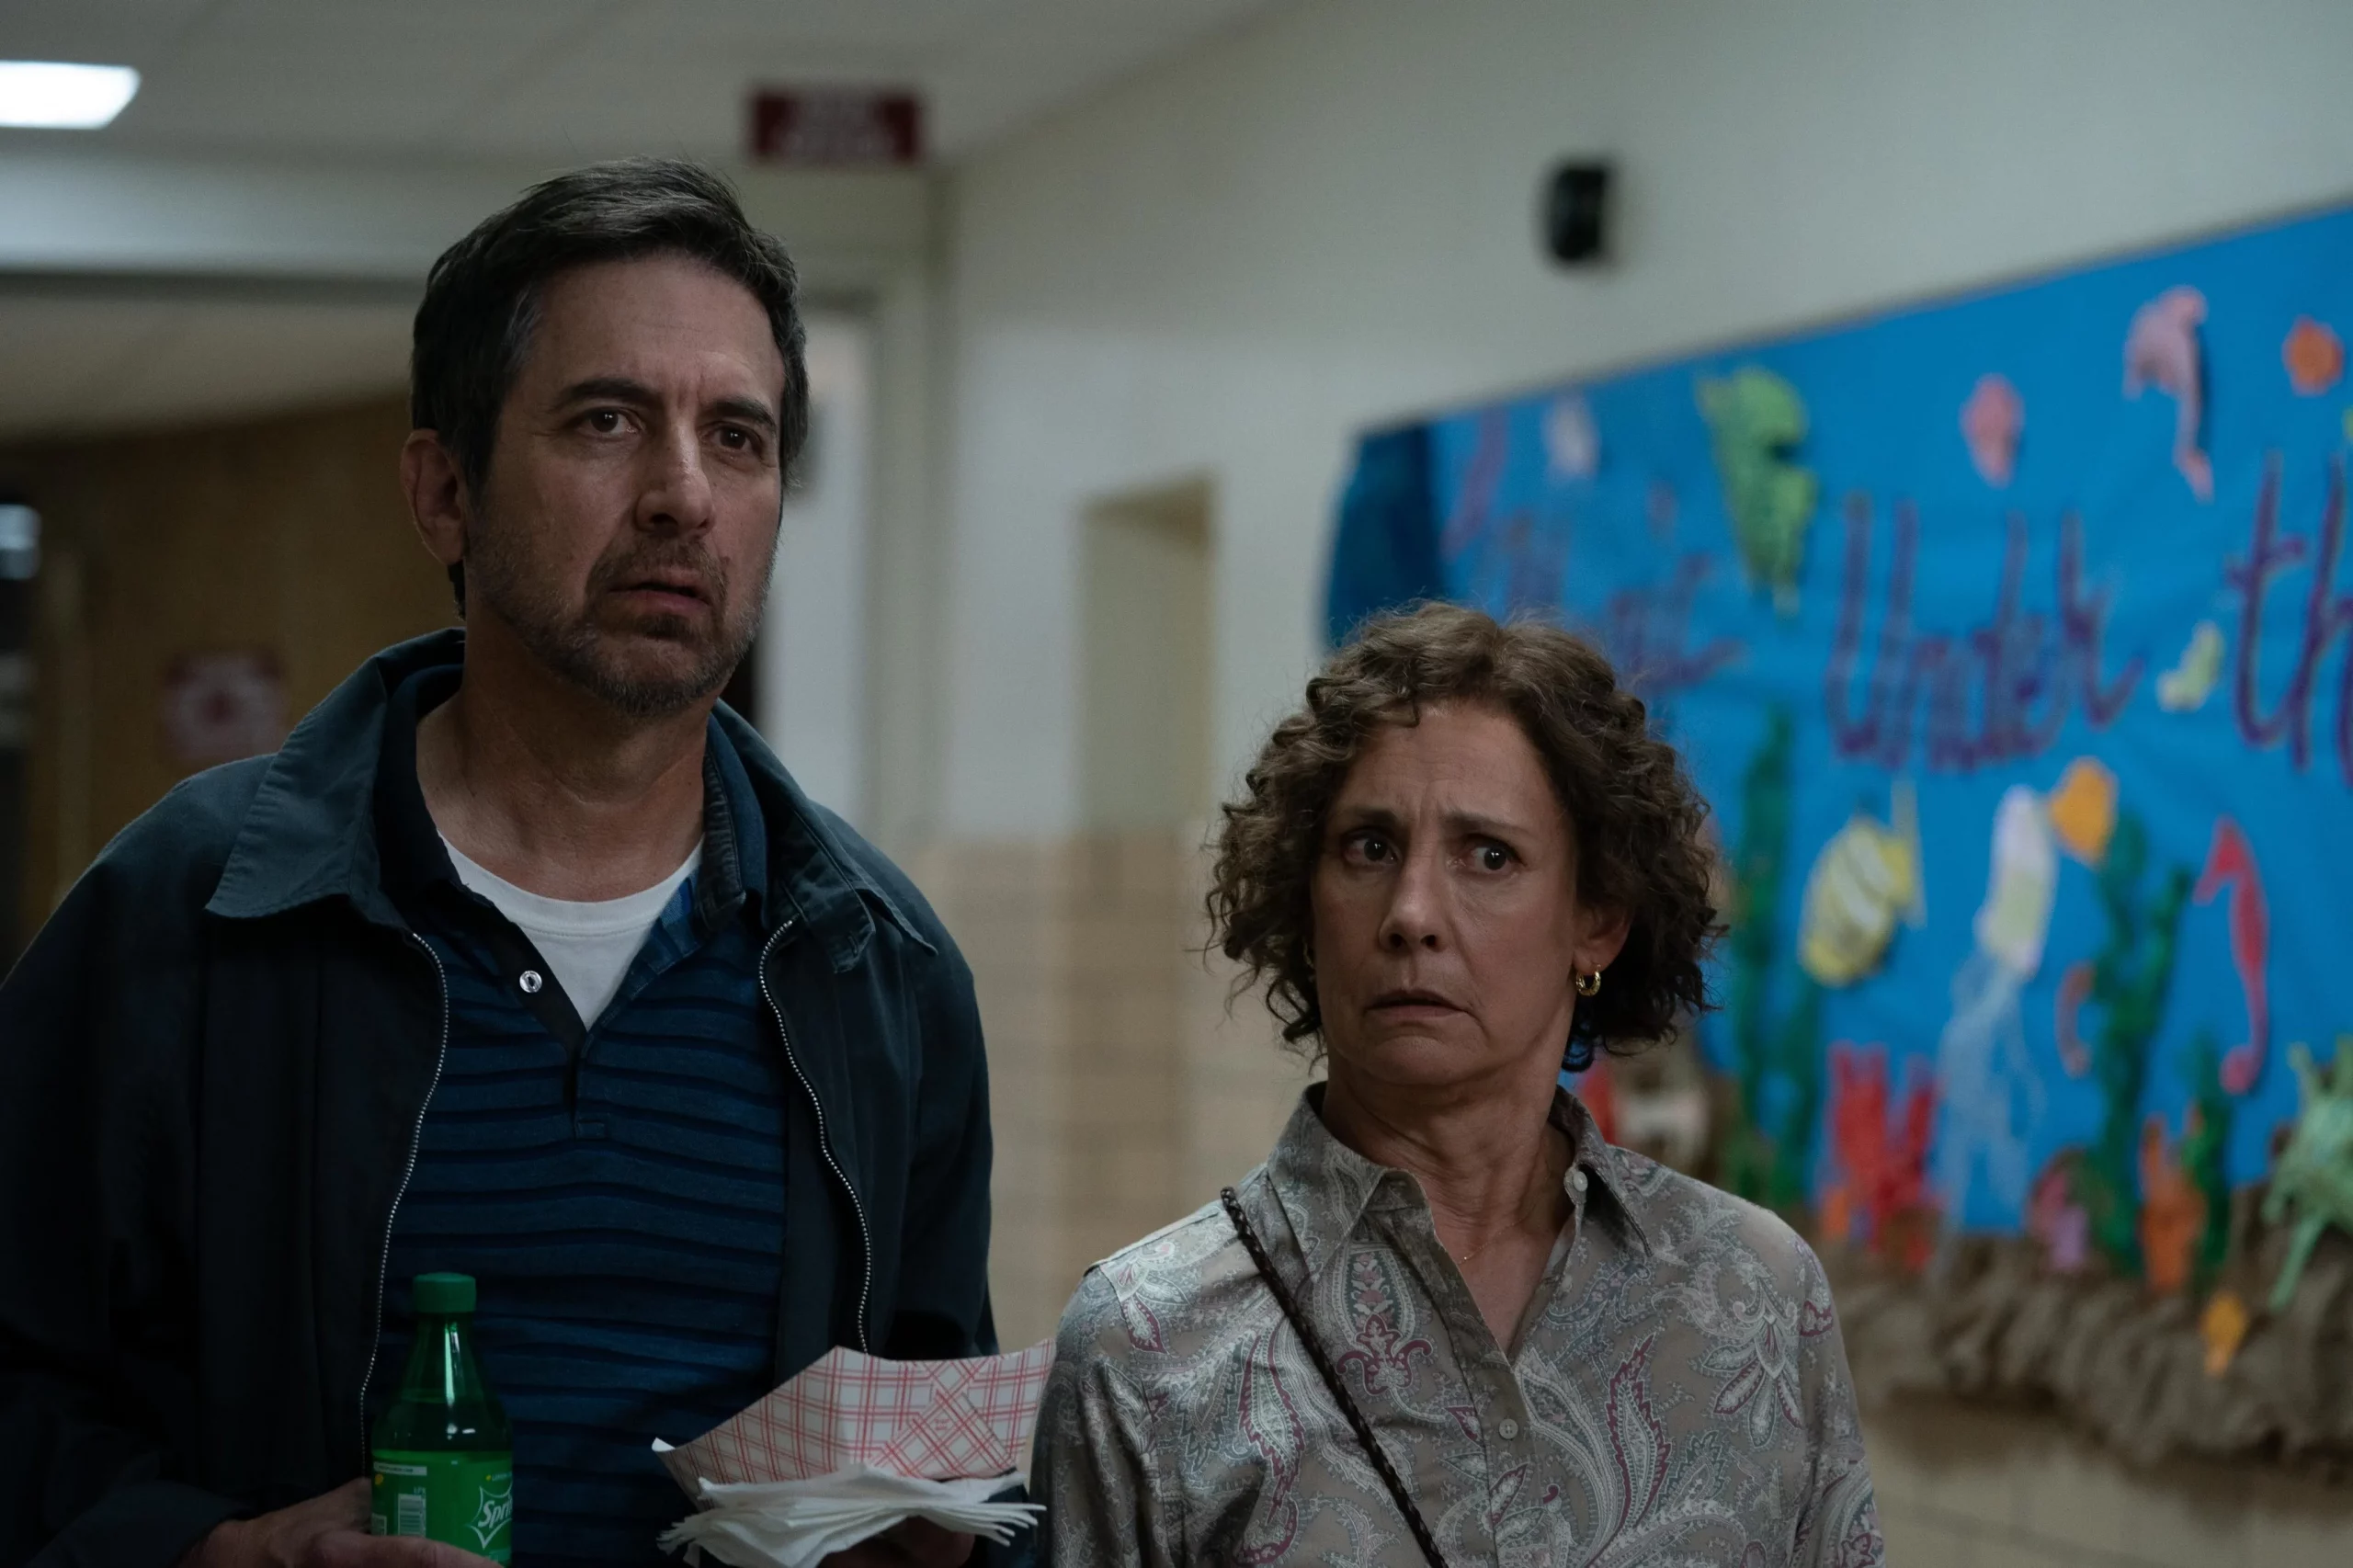 Two adult people give a confused look toward someone off camera. They are in a high school hallway.